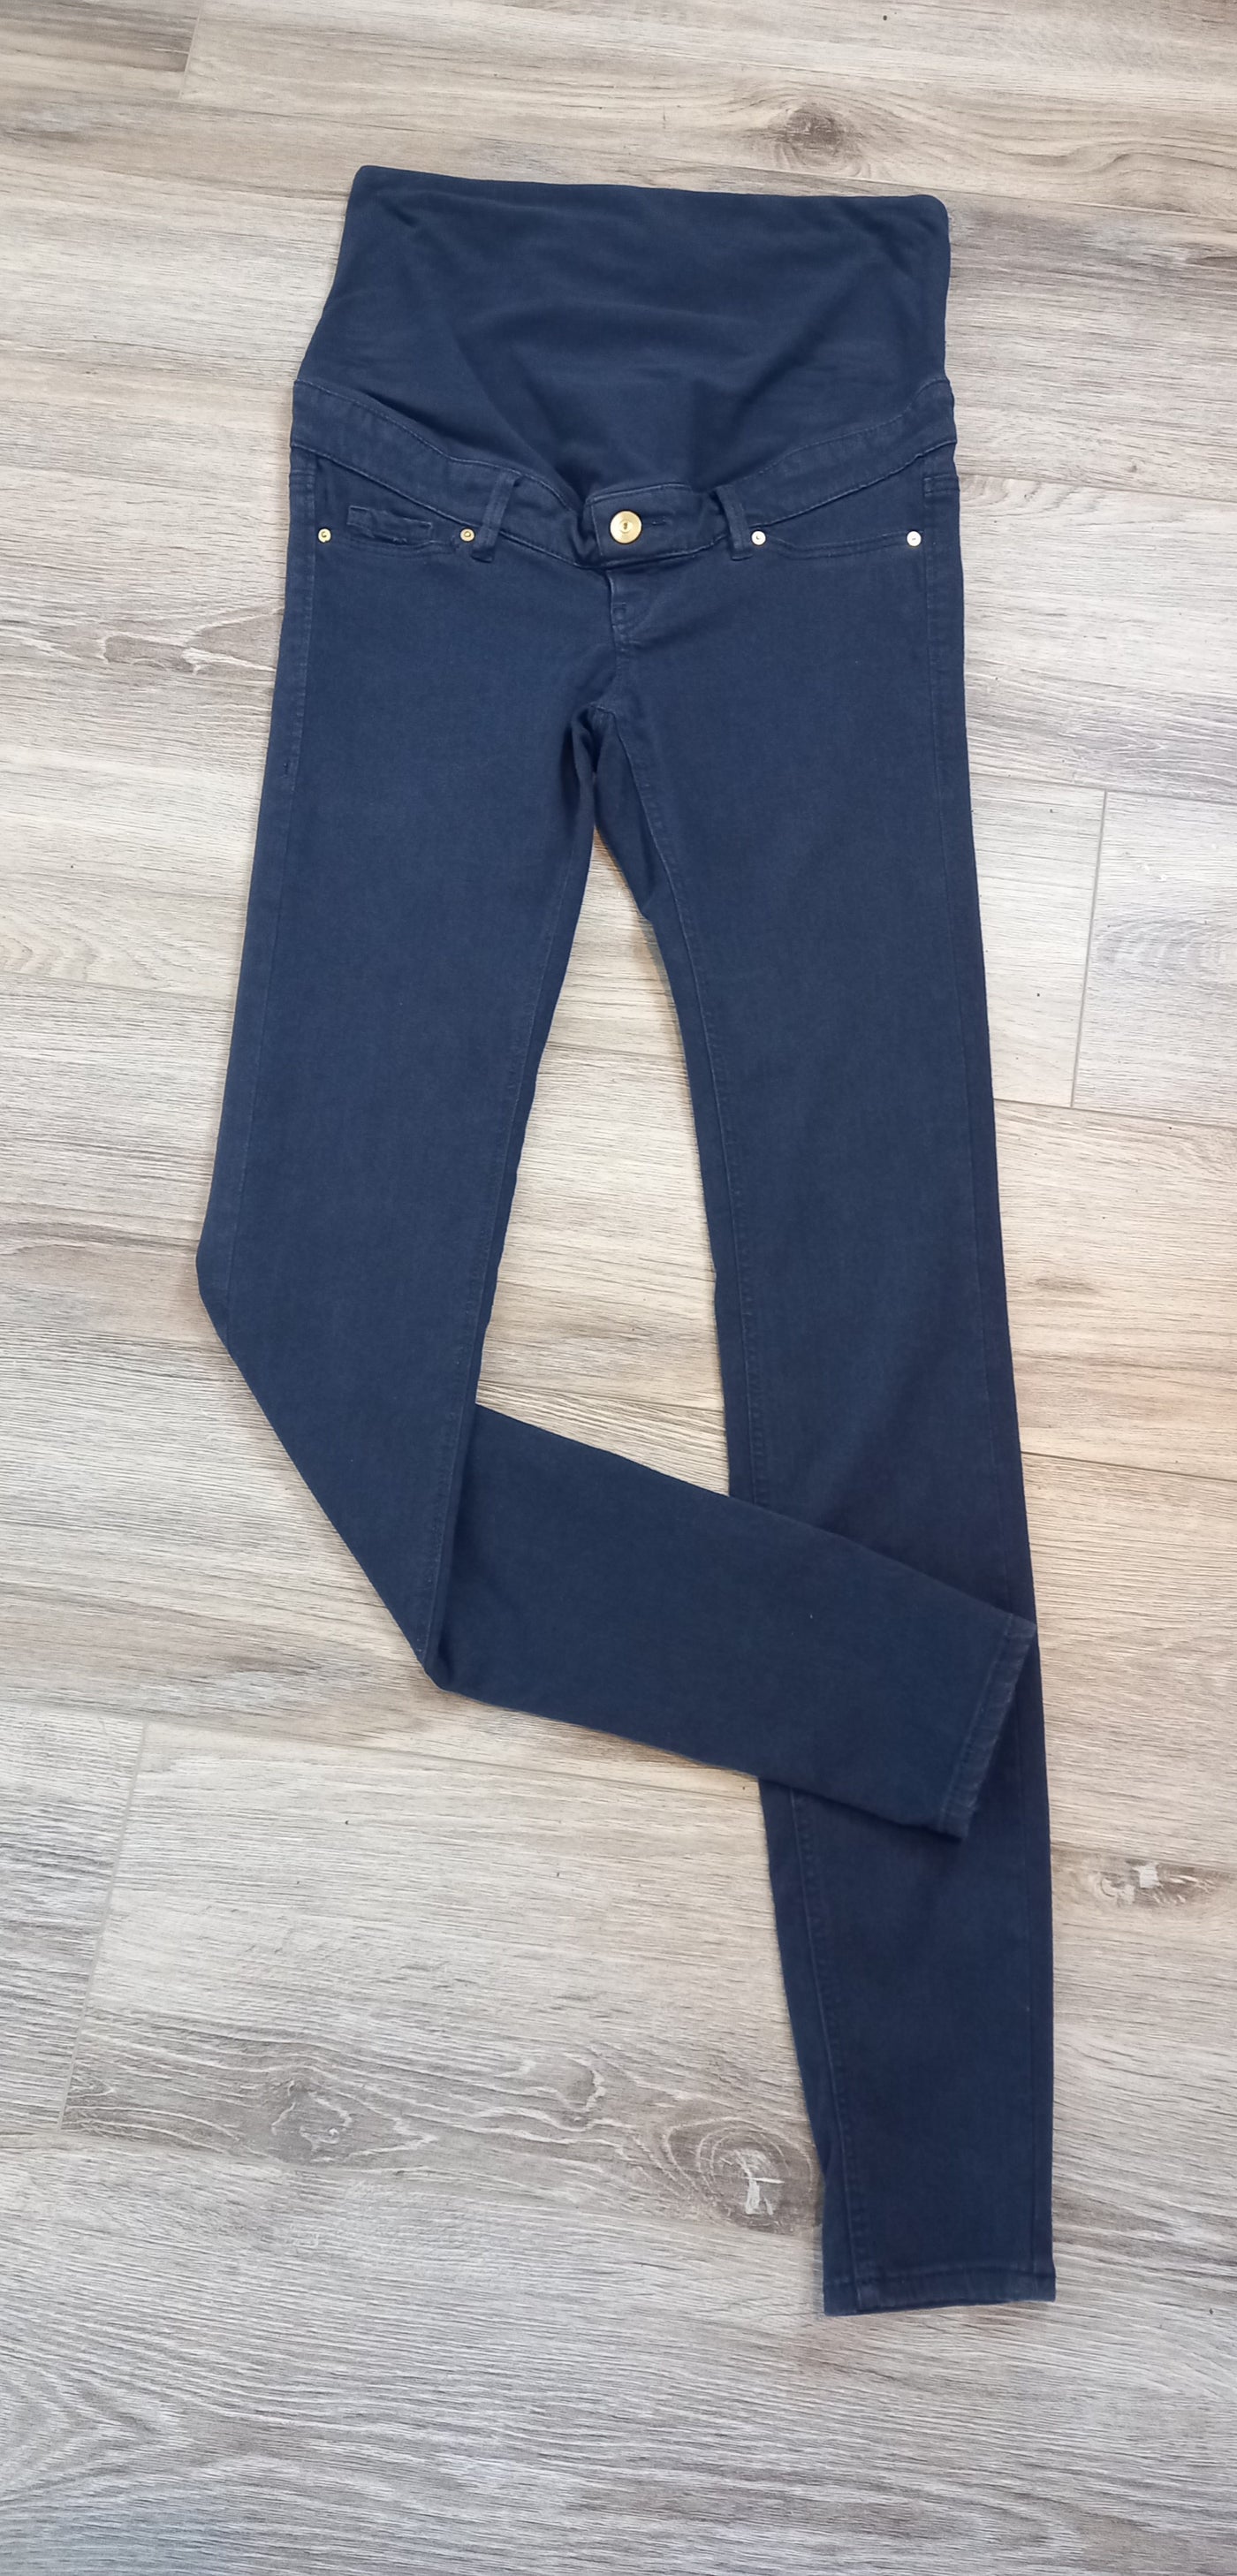 H&M Mama navy overbump soft stretch jeans - Size EUR 34 (Approx UK 6)